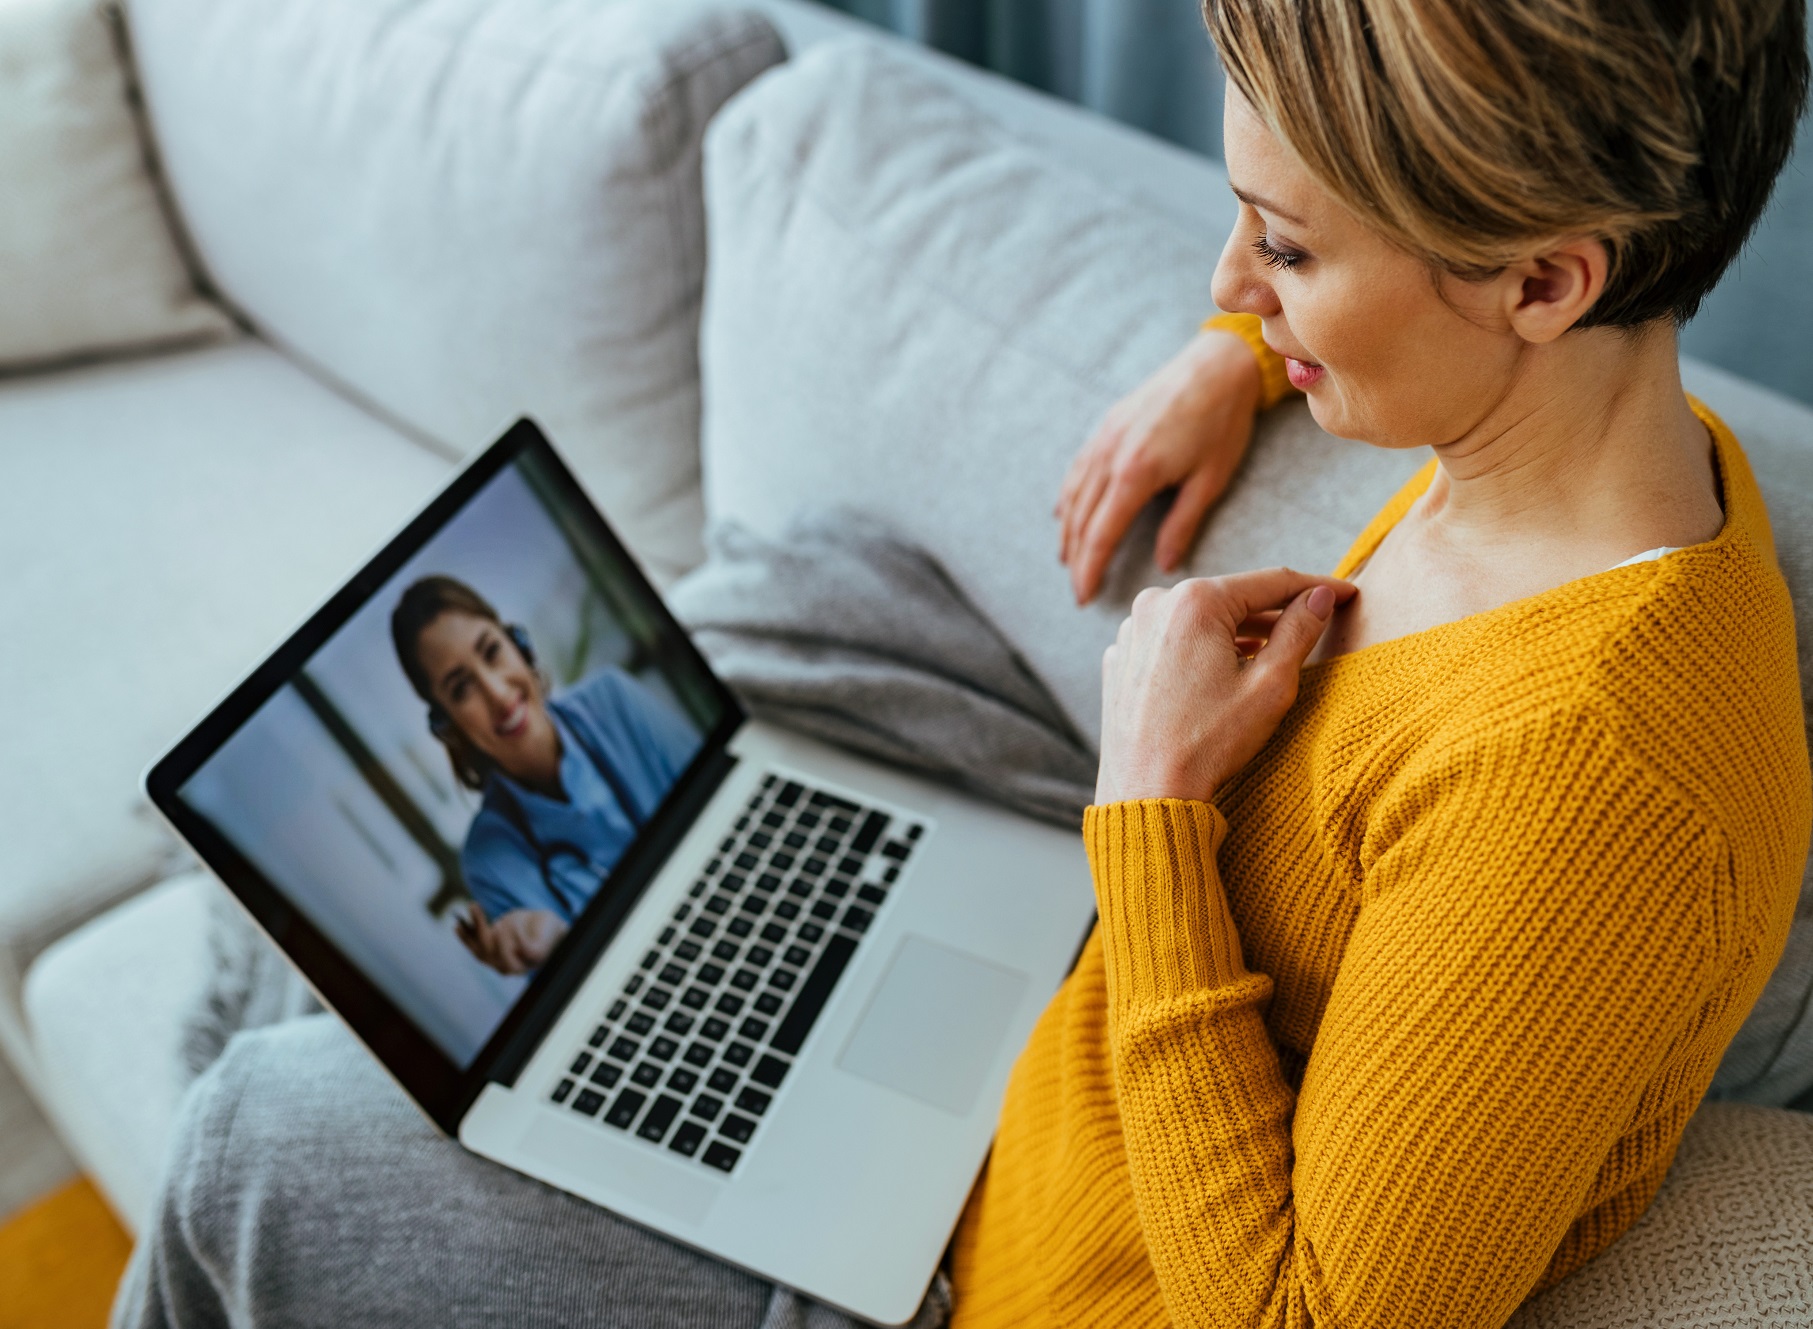 Patient uses telehealth to communicate with her caregiver.